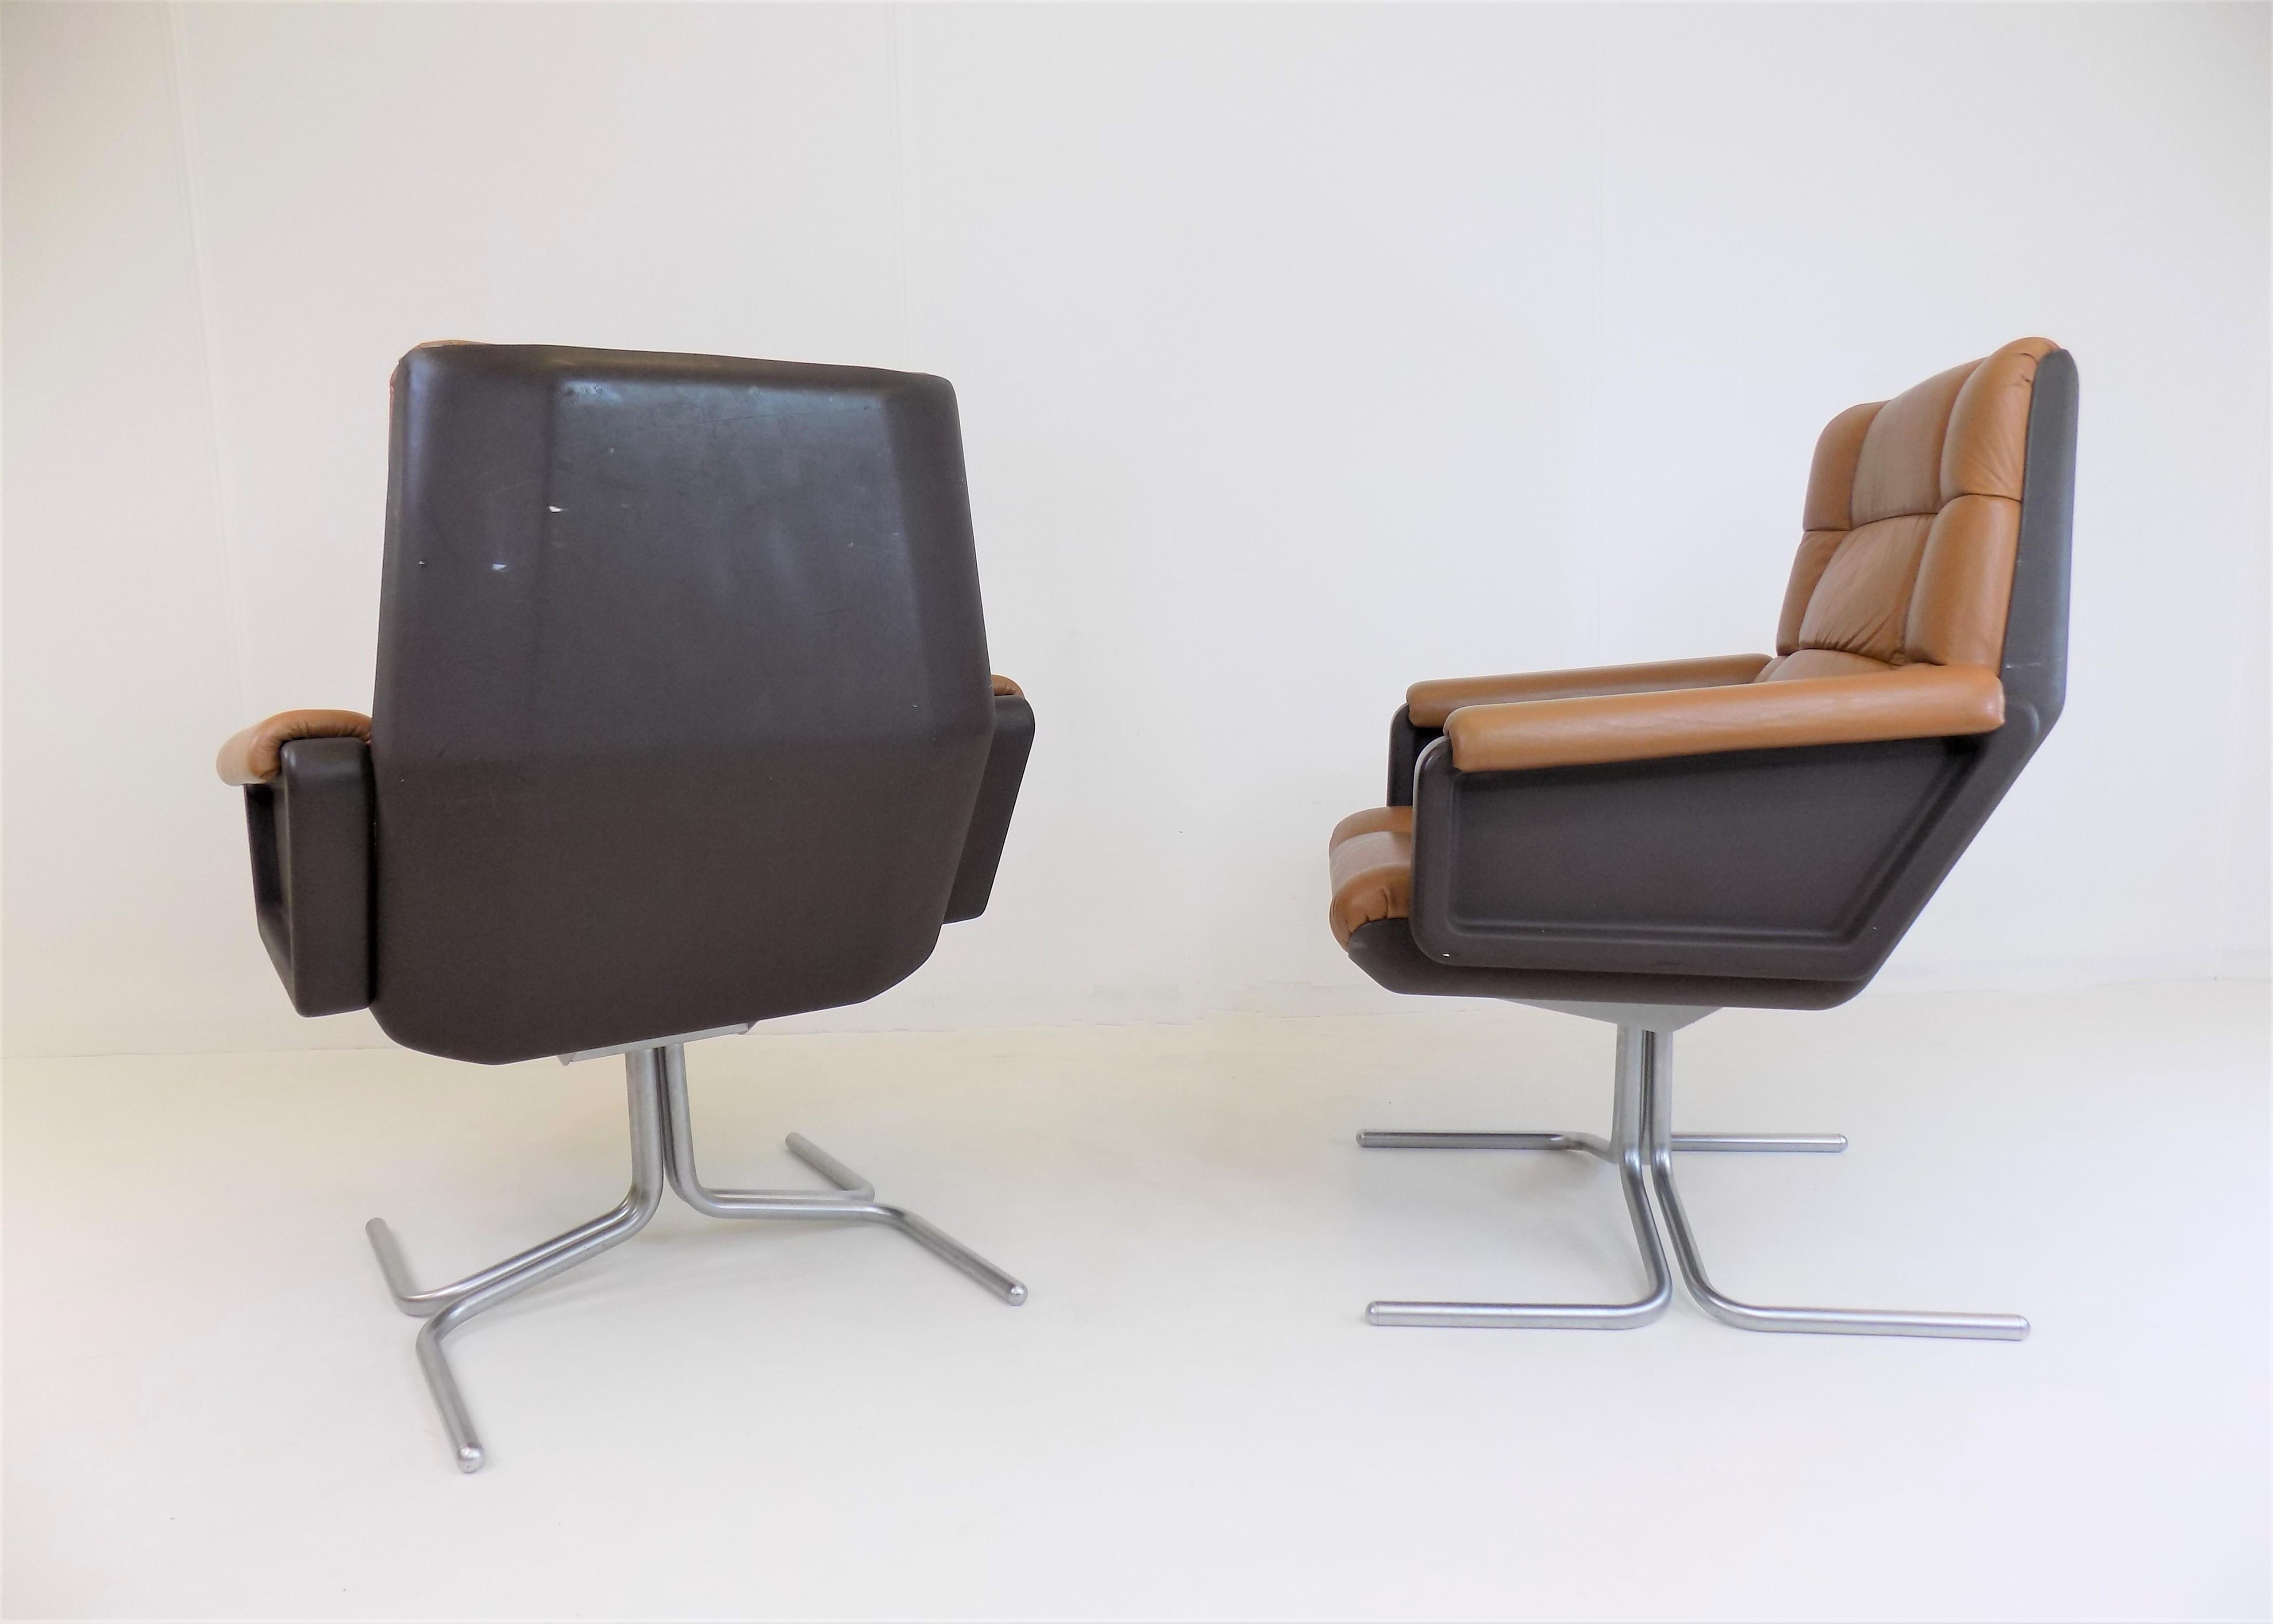 German Set of 2 Mauser Seat 150 leather armchairs by Herbert Hirche